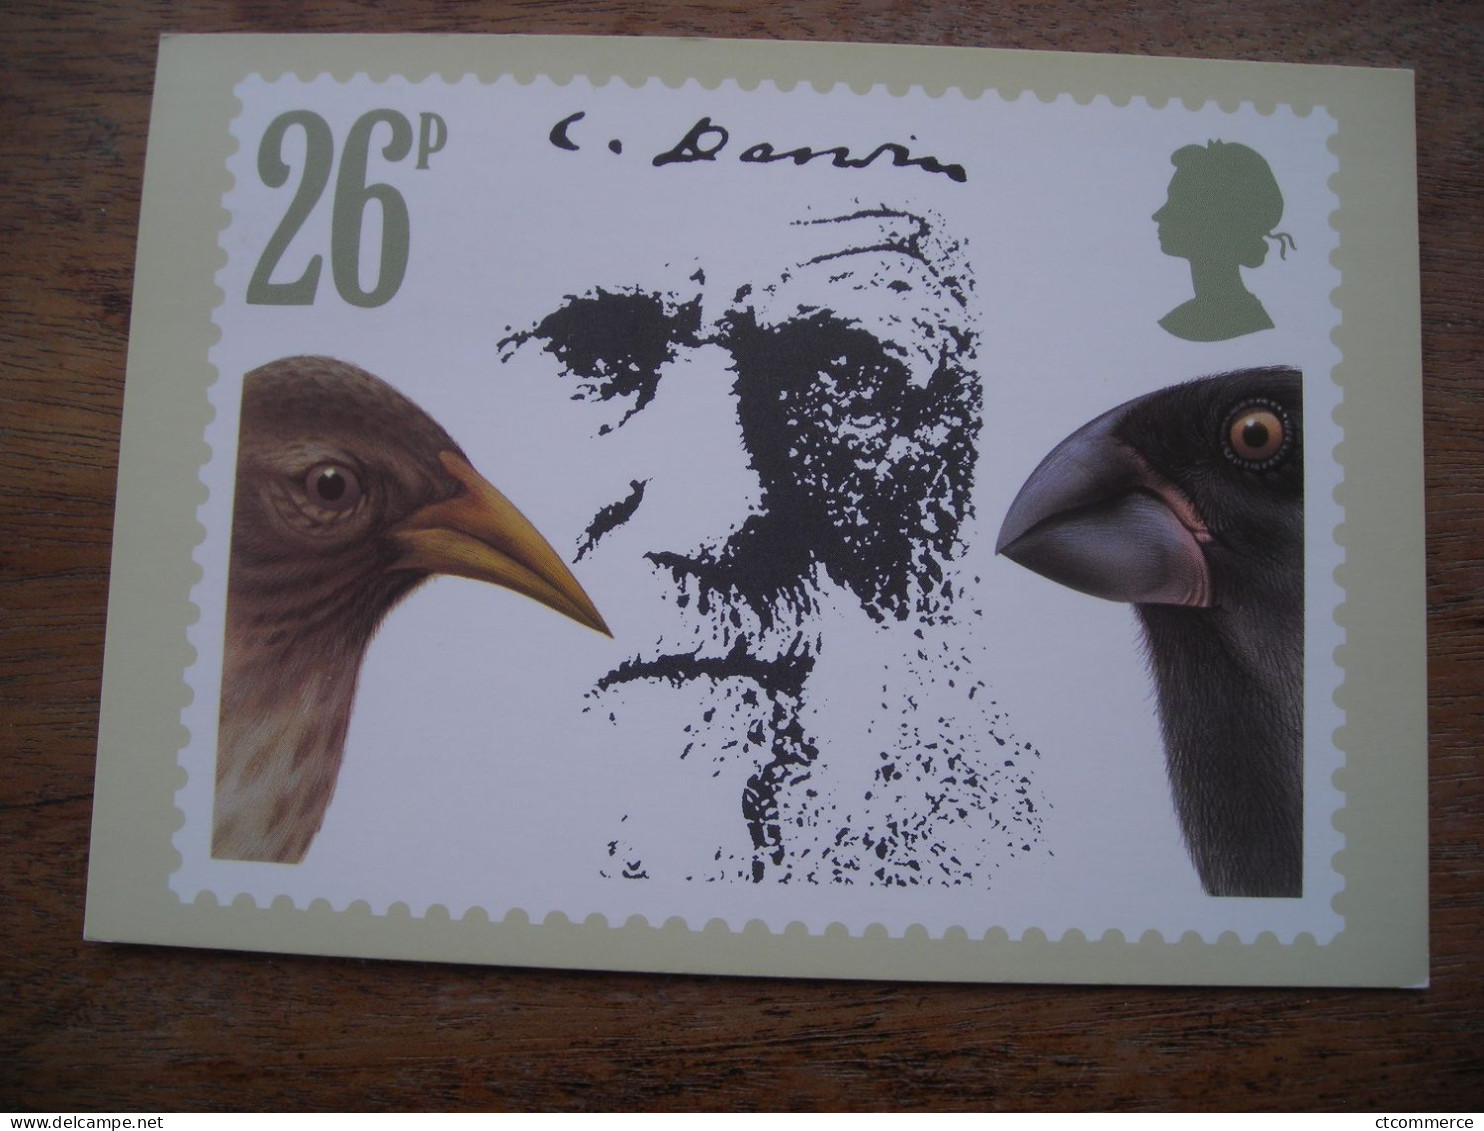 2 Cartes Postales, Premier Jour Charles Darwin Finches Pinsons, Iguanas - Carte PHQ